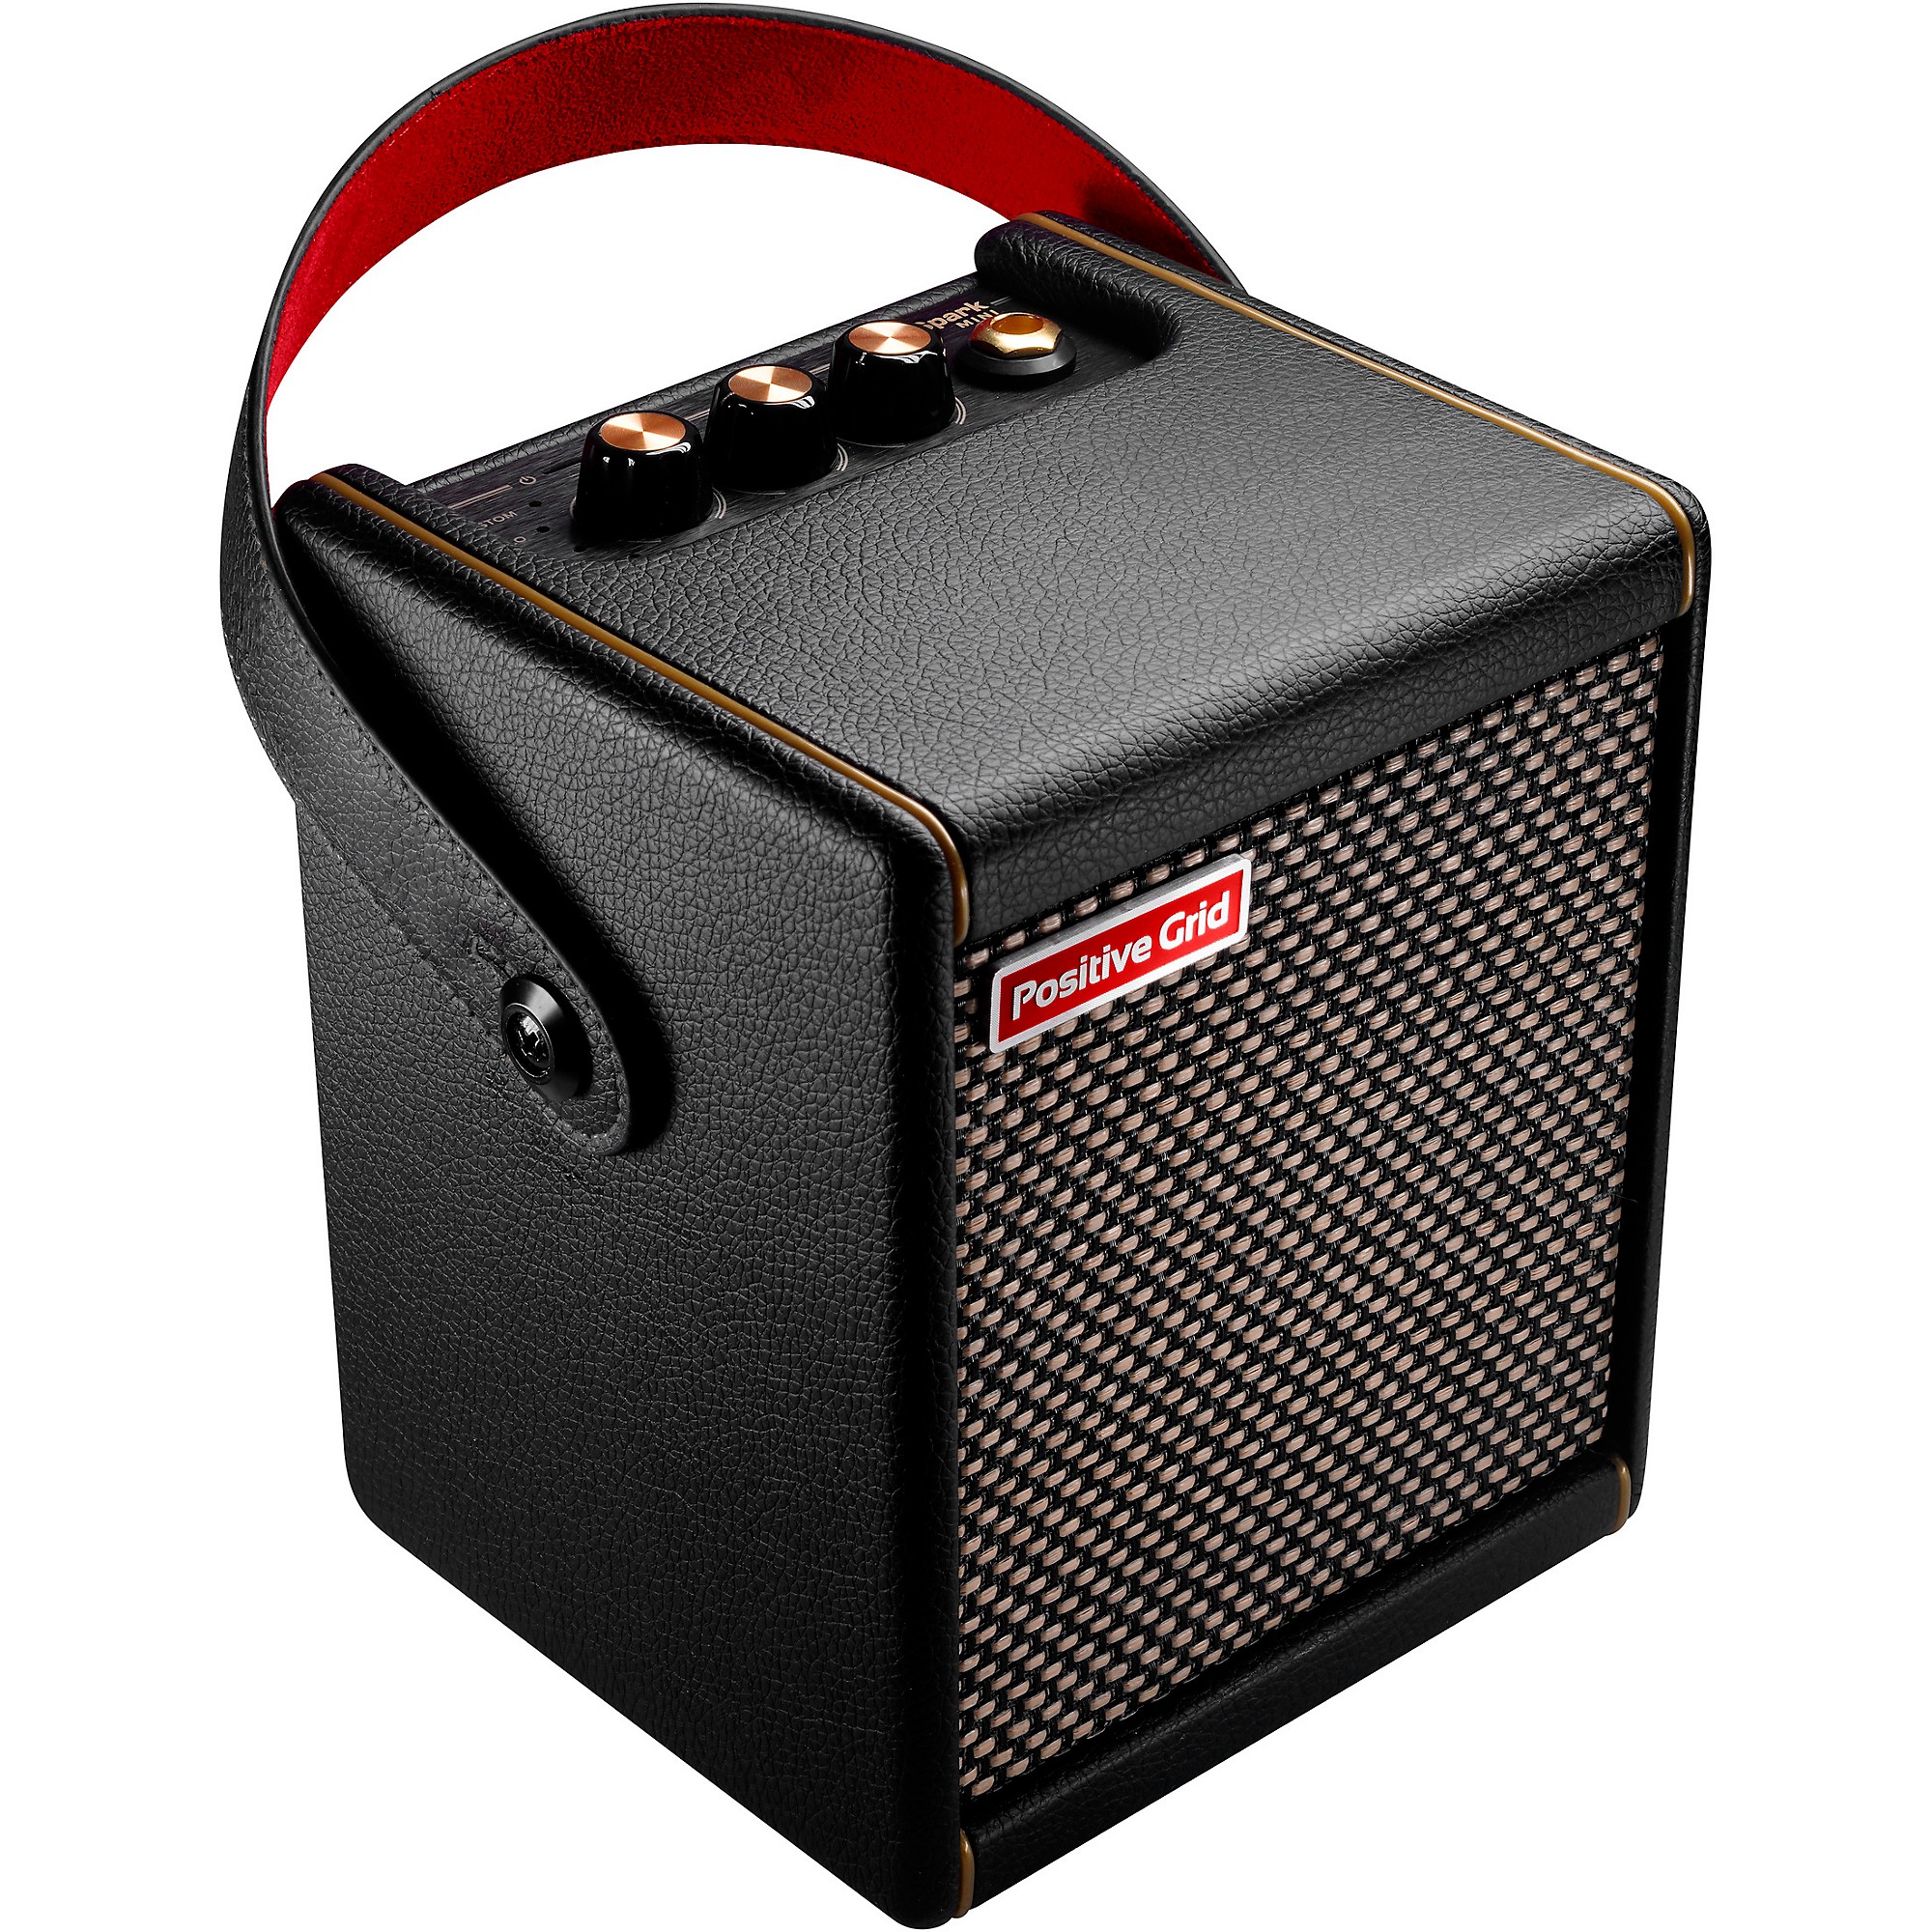 Positive Grid Spark MINI 10W Battery-Powered Stereo Combo Amp 